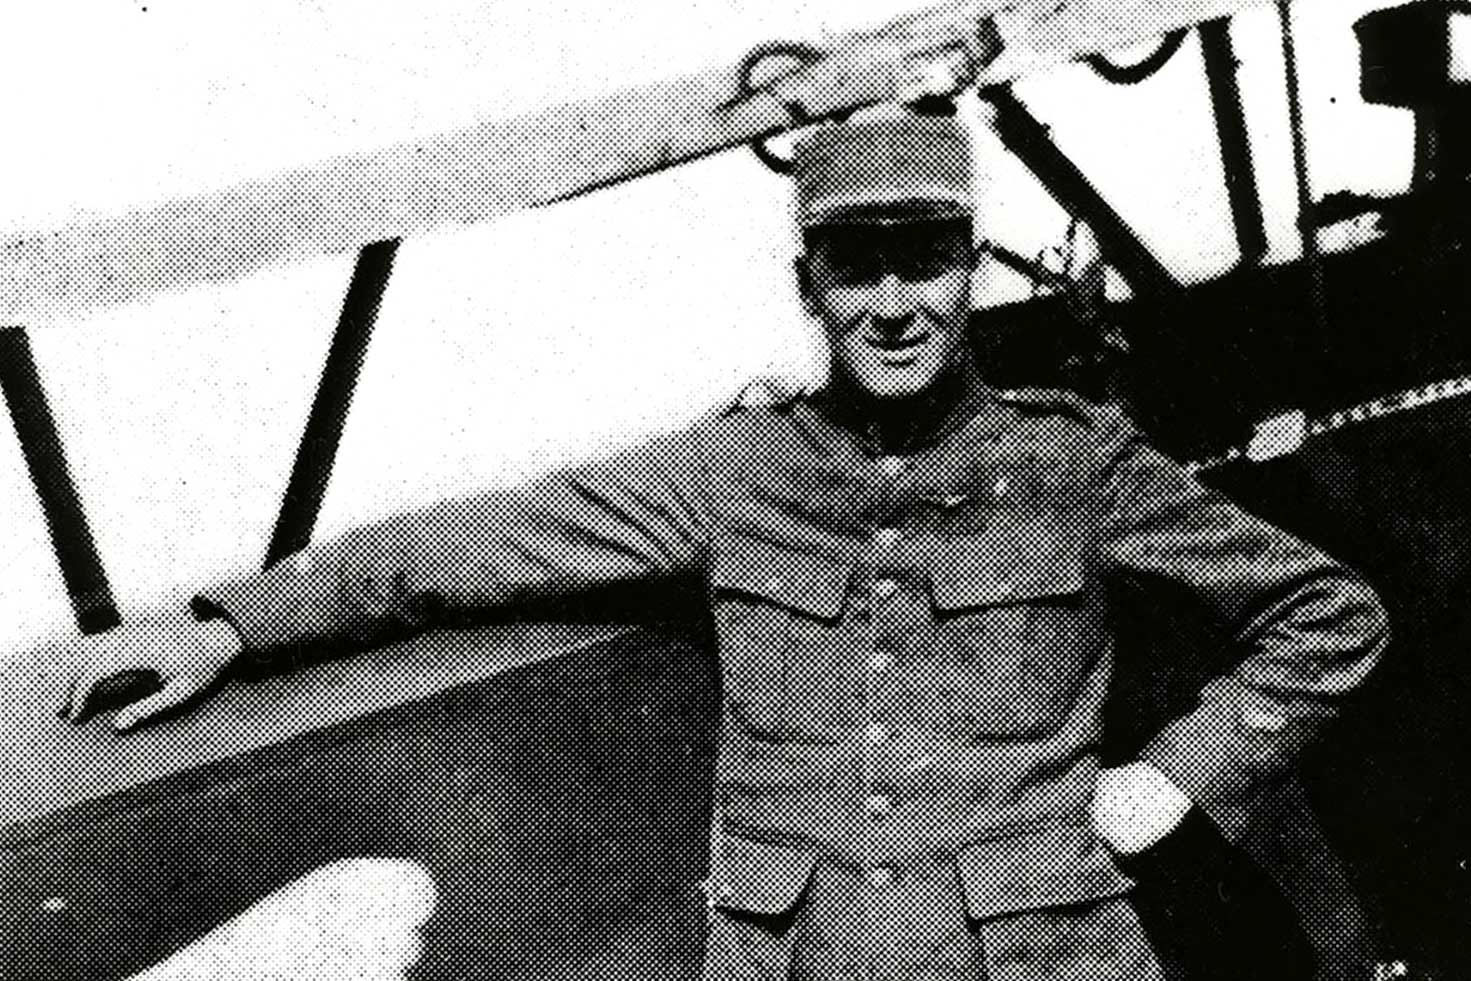 James McConnell, who flew for France, was the last American pilot to be killed in World War I before the U.S. joined the fighting. (Photo courtesy of UVA Library)